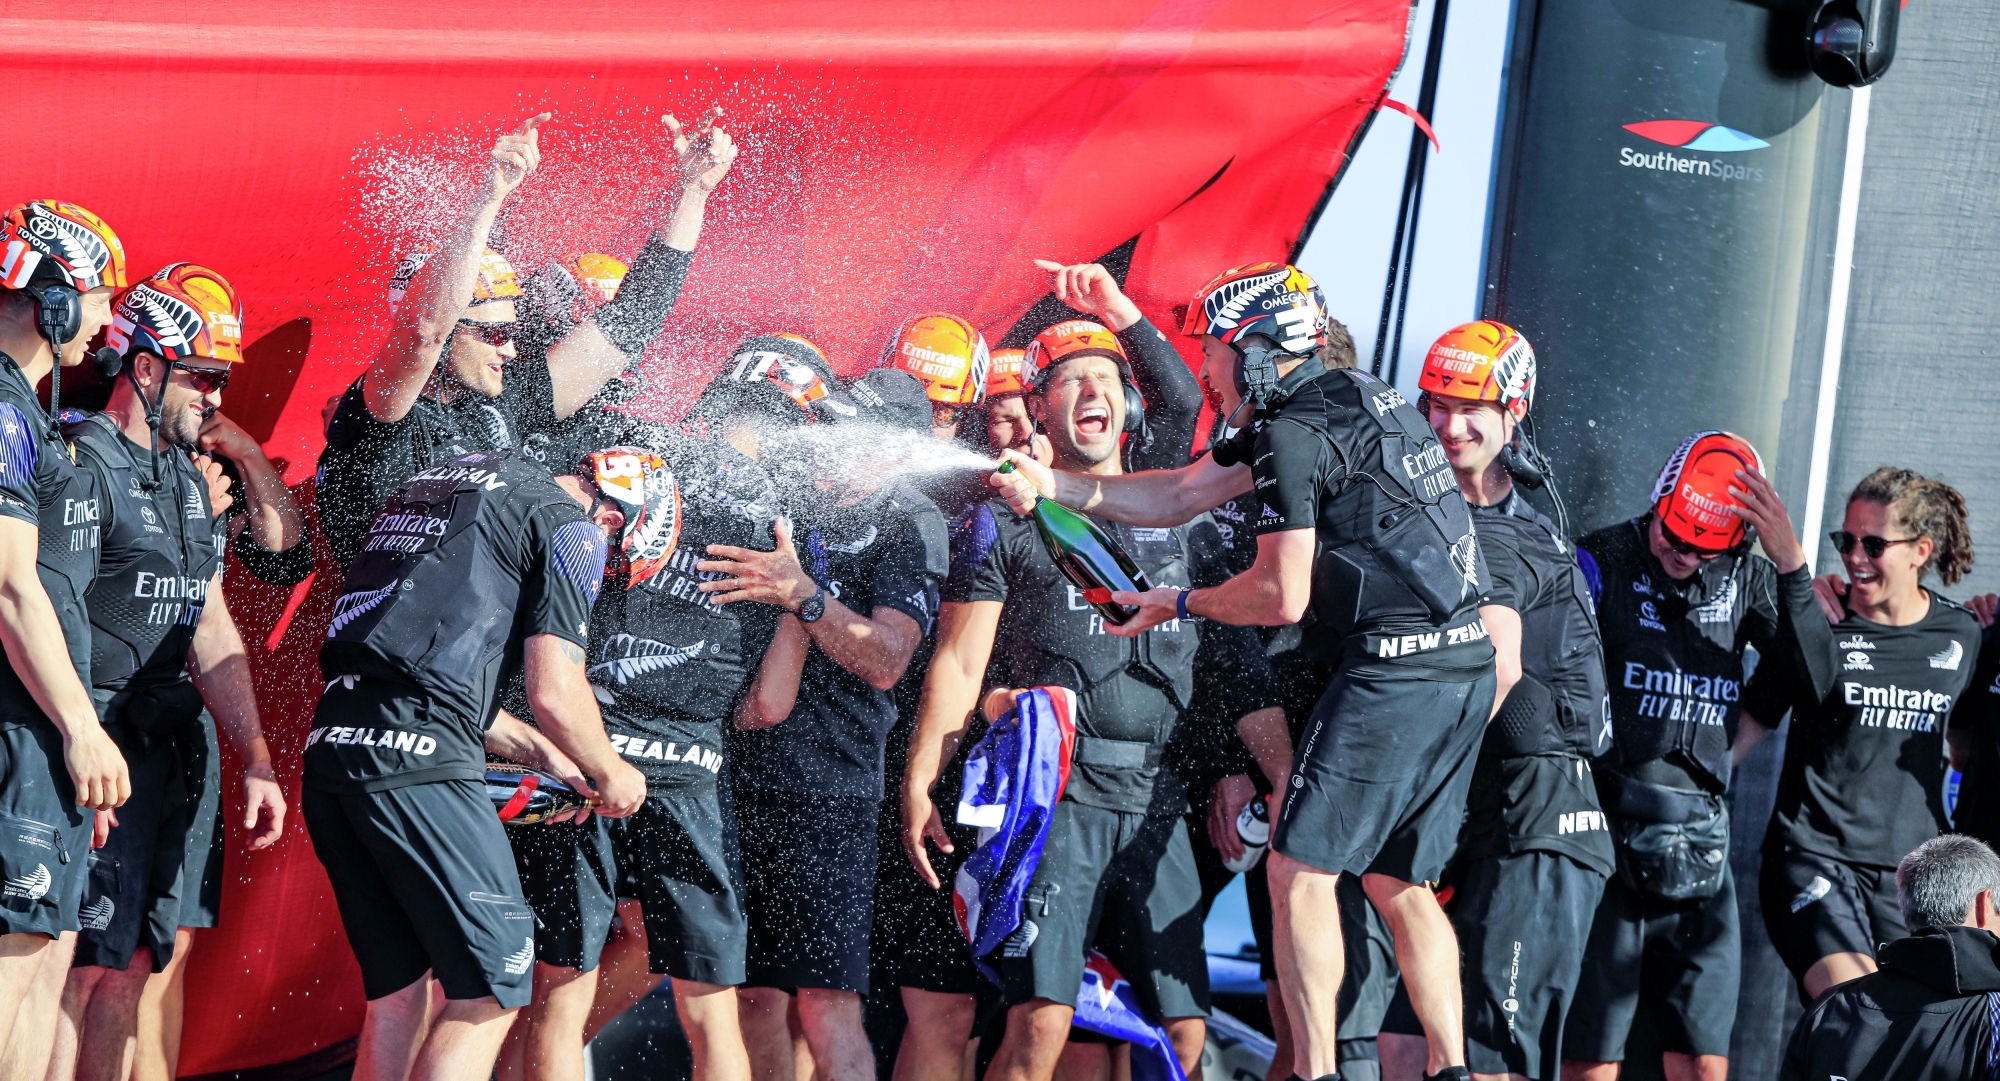  America's Cup  Auckland NZL  Final Day  Successfull defense for Team New Zea